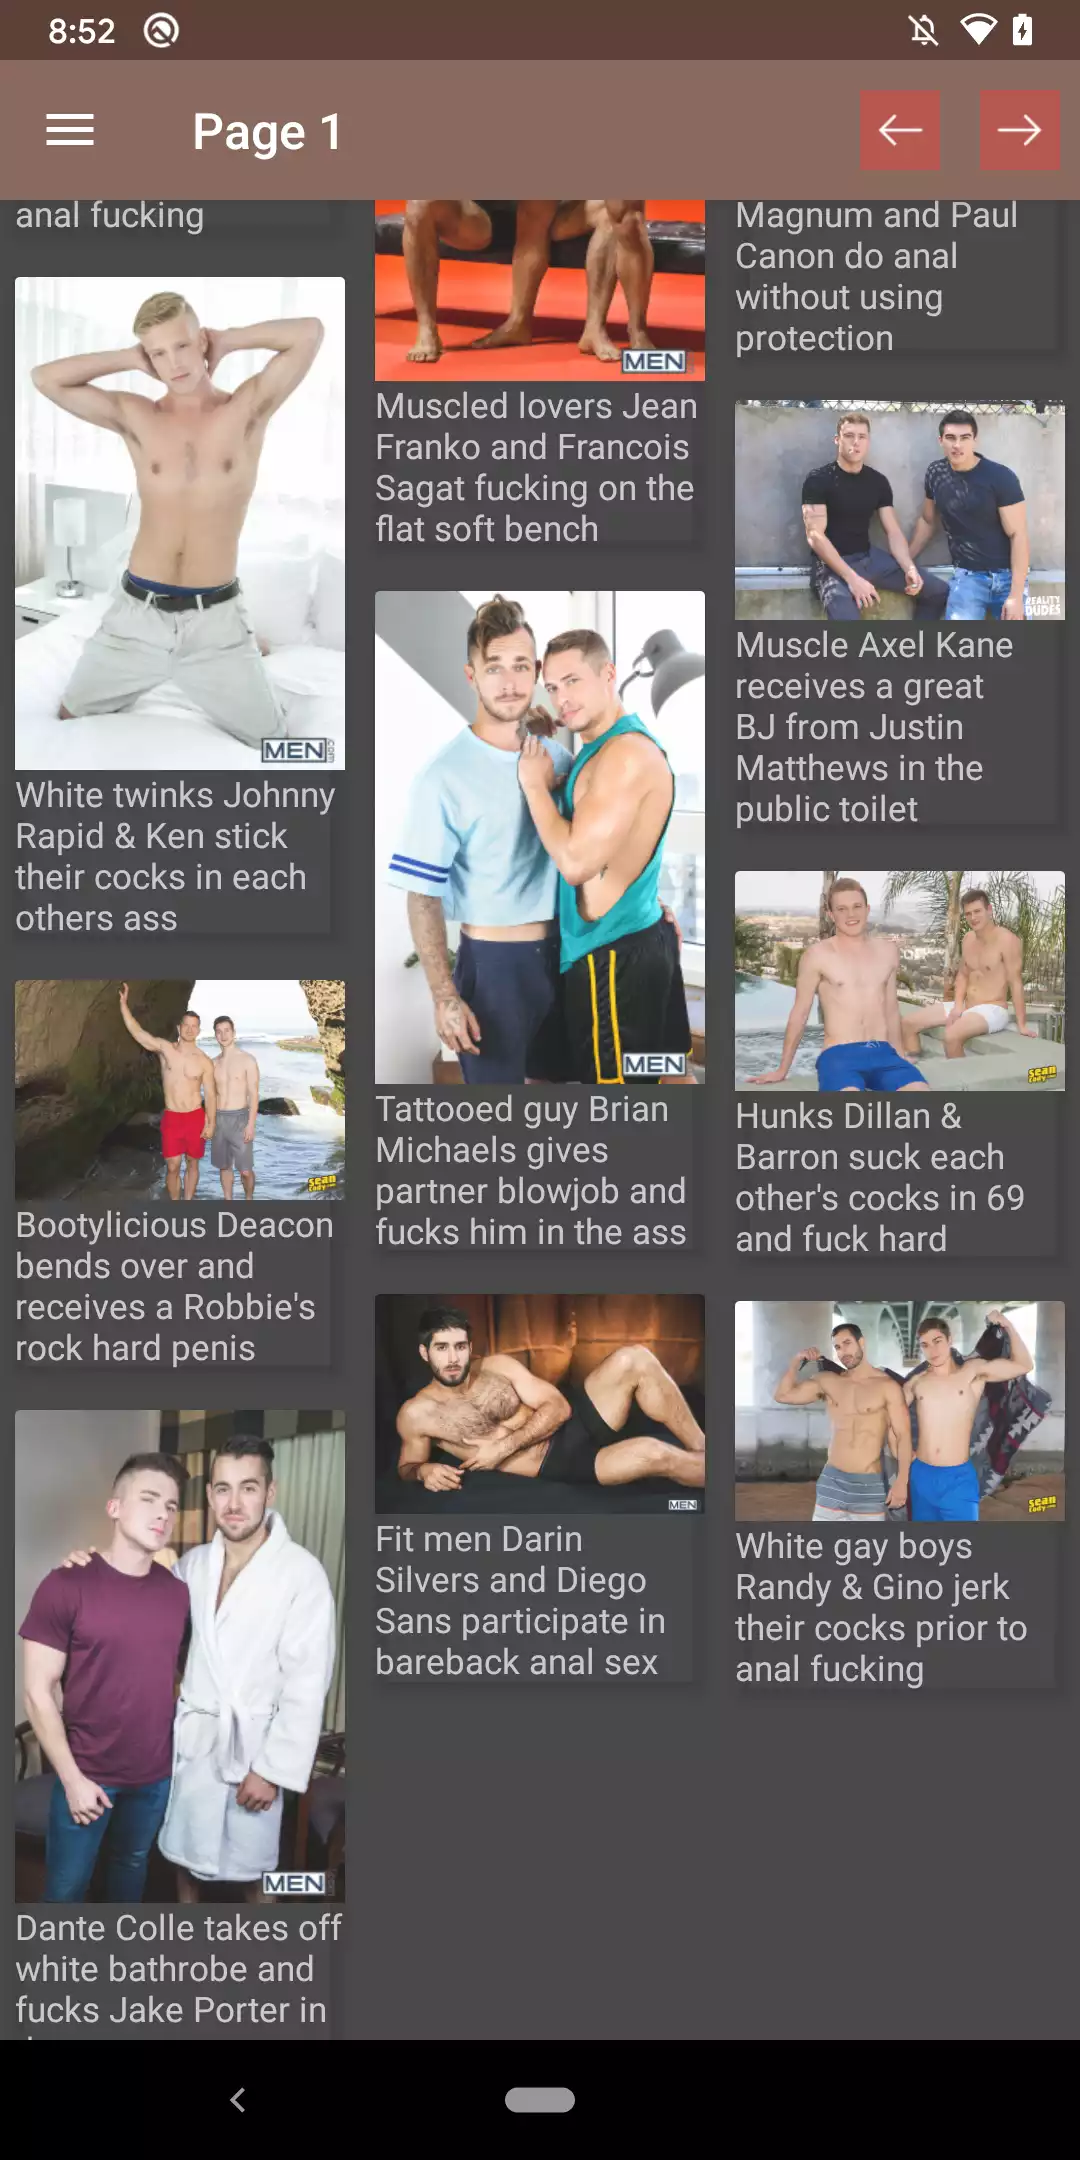 New Gay Galleries best,picture,erotic,pictures,hentai,galleries,free,wallpaper,men,hot,puzzle,gallery,apk,gay,topless,pic,henta,collection,porn,pron,pornstar,phone,app,sexy